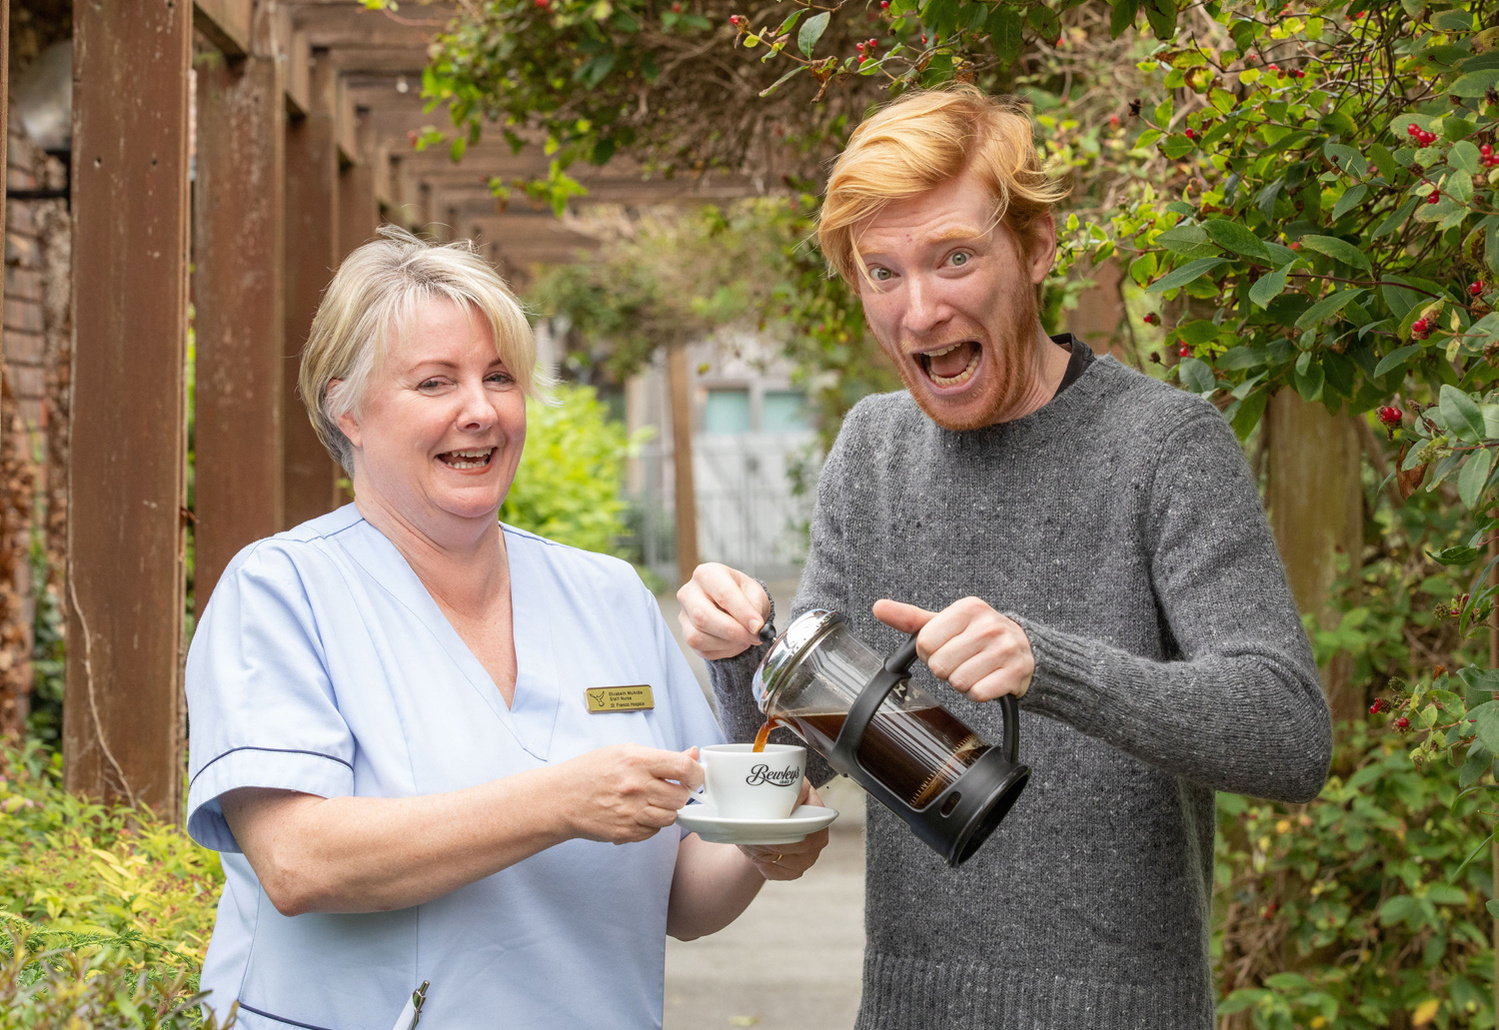 Irish actor Domhnall Gleeson joins forces with Bewley's to raise funds for Hospice services. Domhnall is pictured pouring coffee for a hospice nurse in the grounds of Harolds Cross Hospice. Bewley’s Big Coffee Morning Social for Hospice